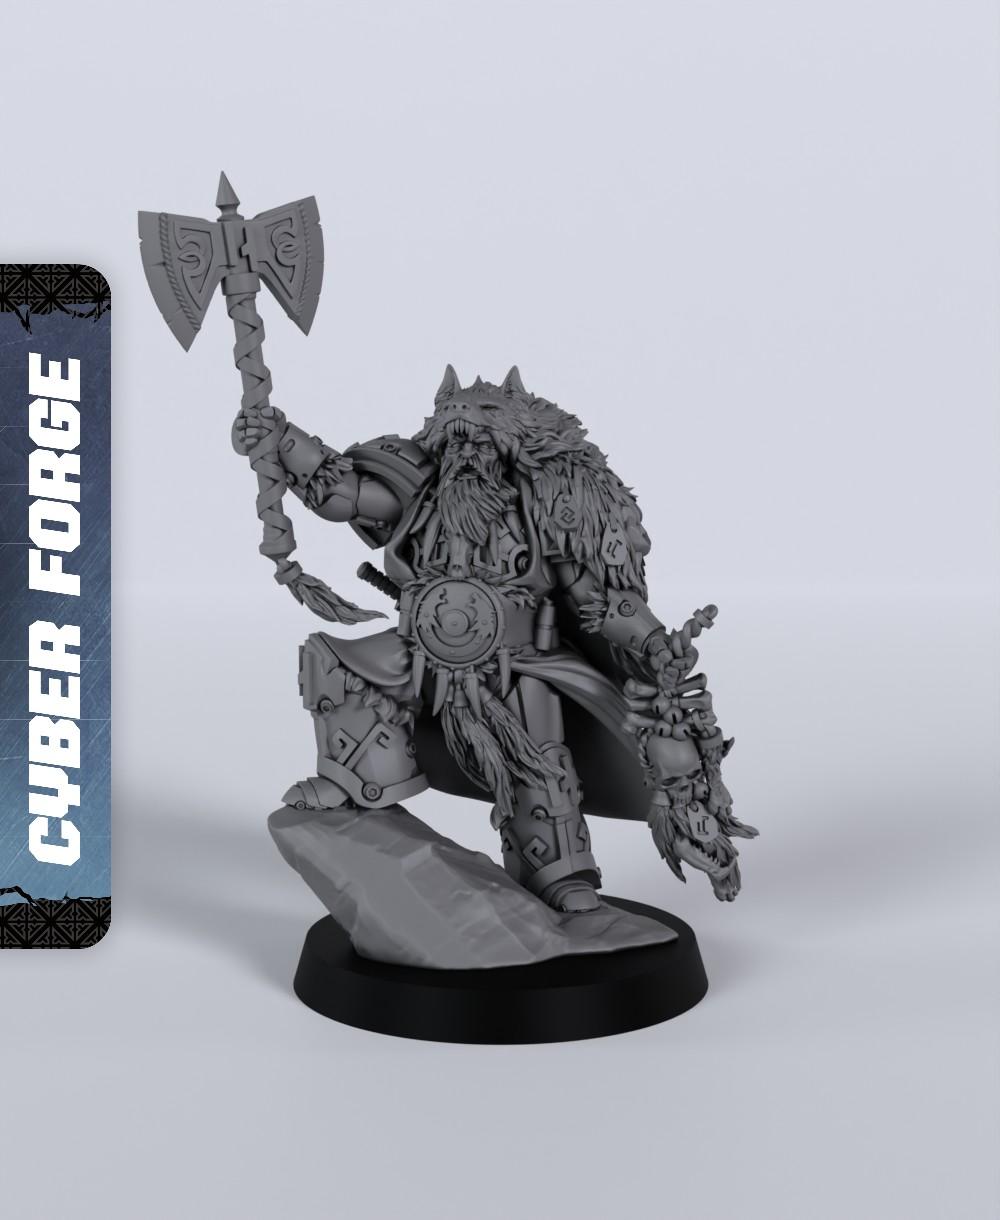 Loki - With Free Cyberpunk Warhammer - 40k Sci-Fi Gift Ideas for RPG and Wargamers 3d model